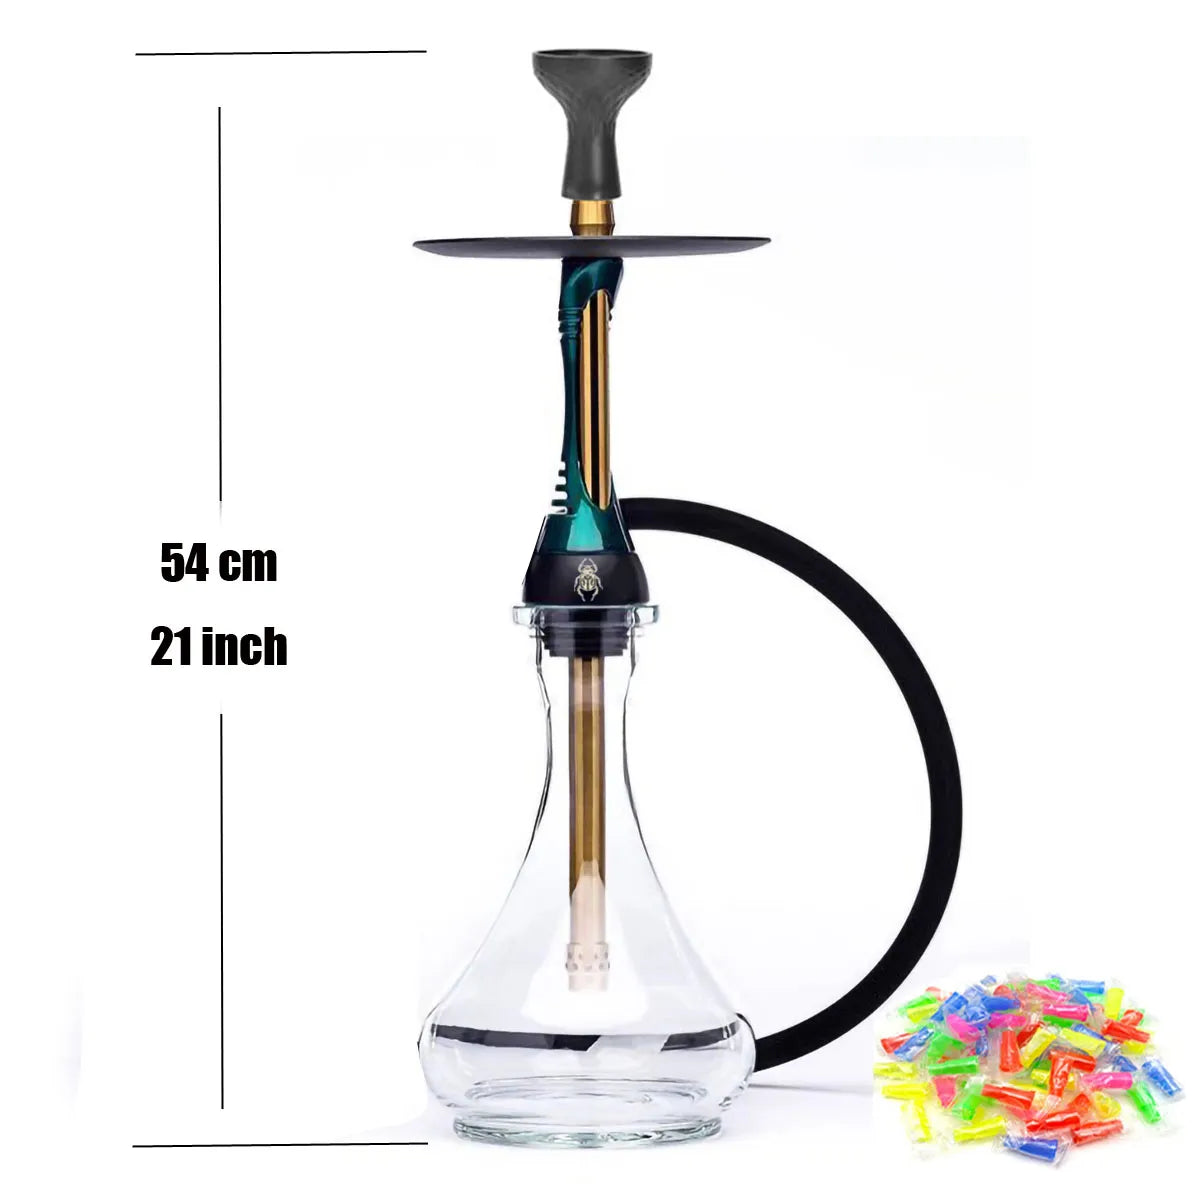 Hookah Set with Glass Base, Stainless Steel Shisha Narguile Nargile Chicha Shesha Cachimba Tabacco Pipe Smoking Accessories